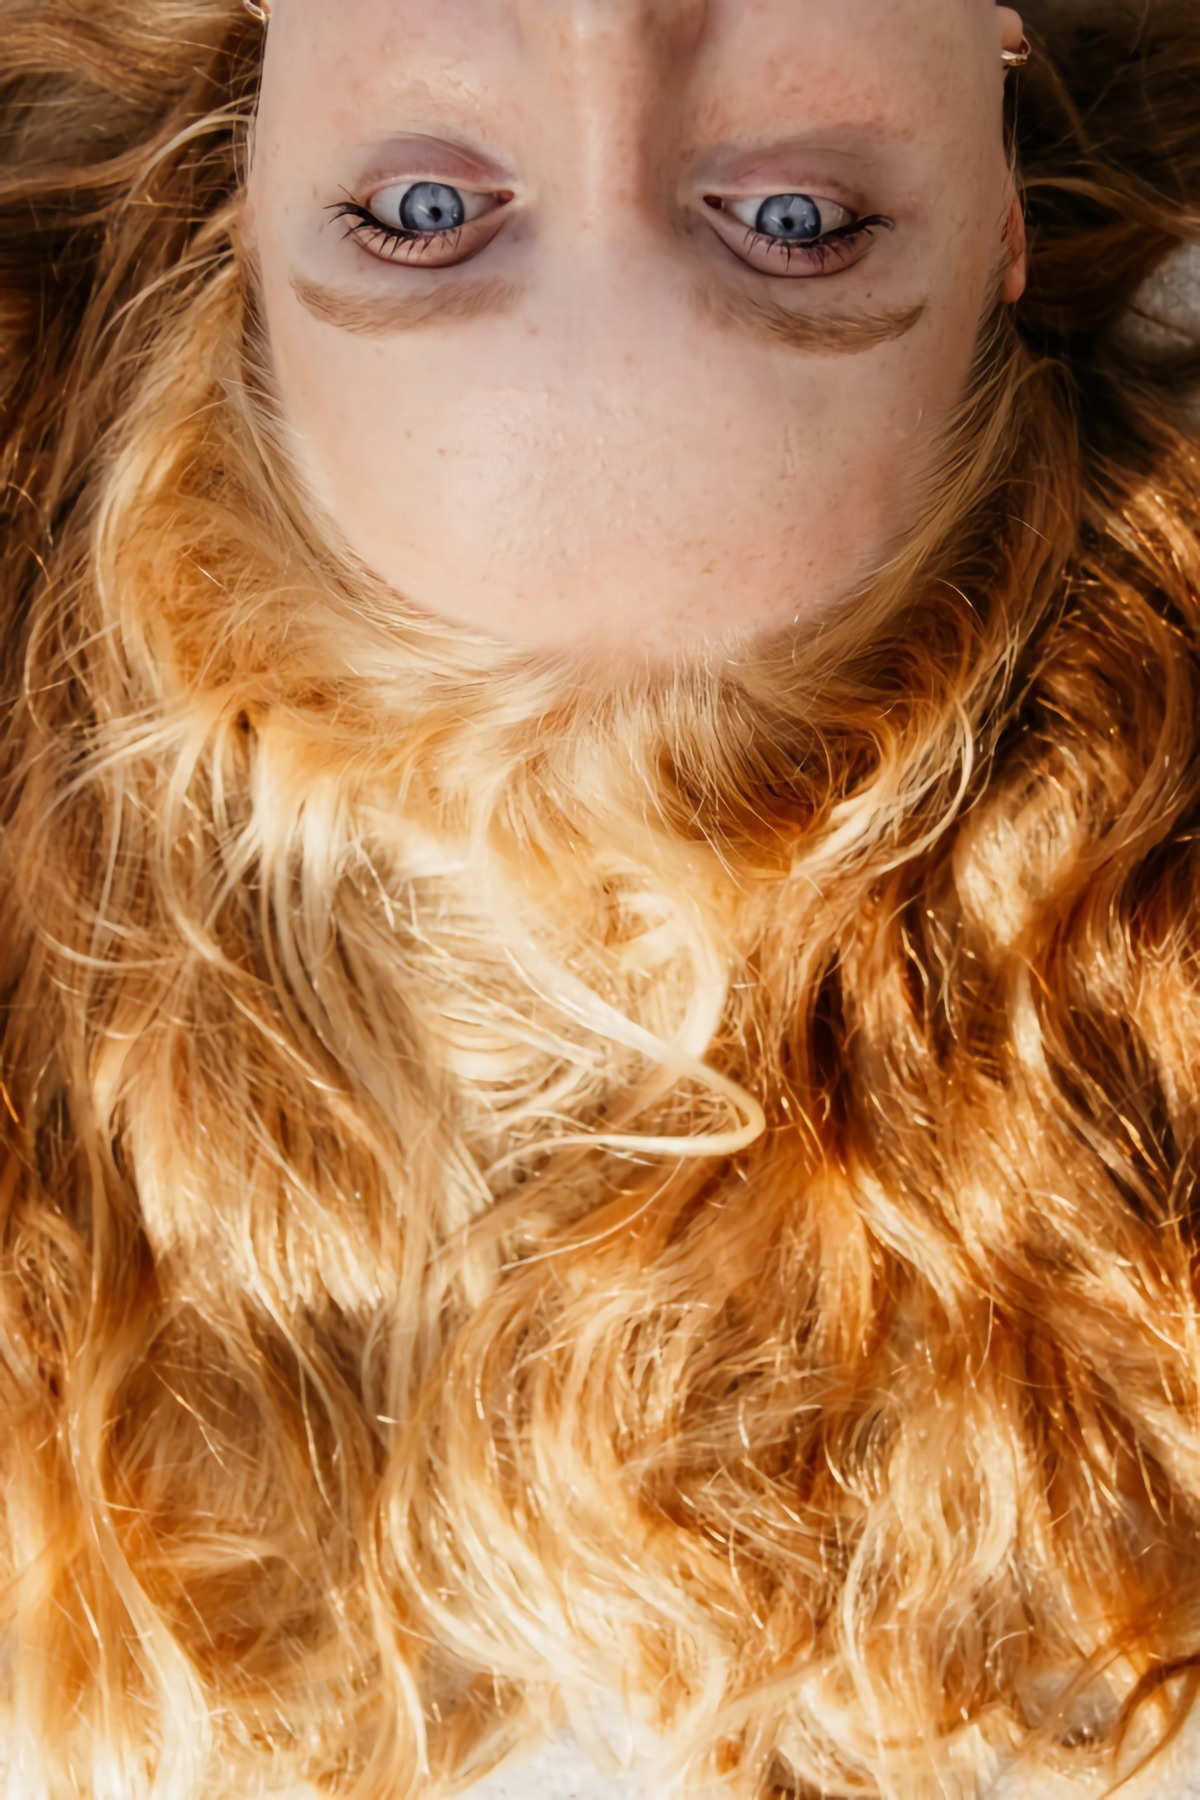 winter hair care tips you should definitely follow